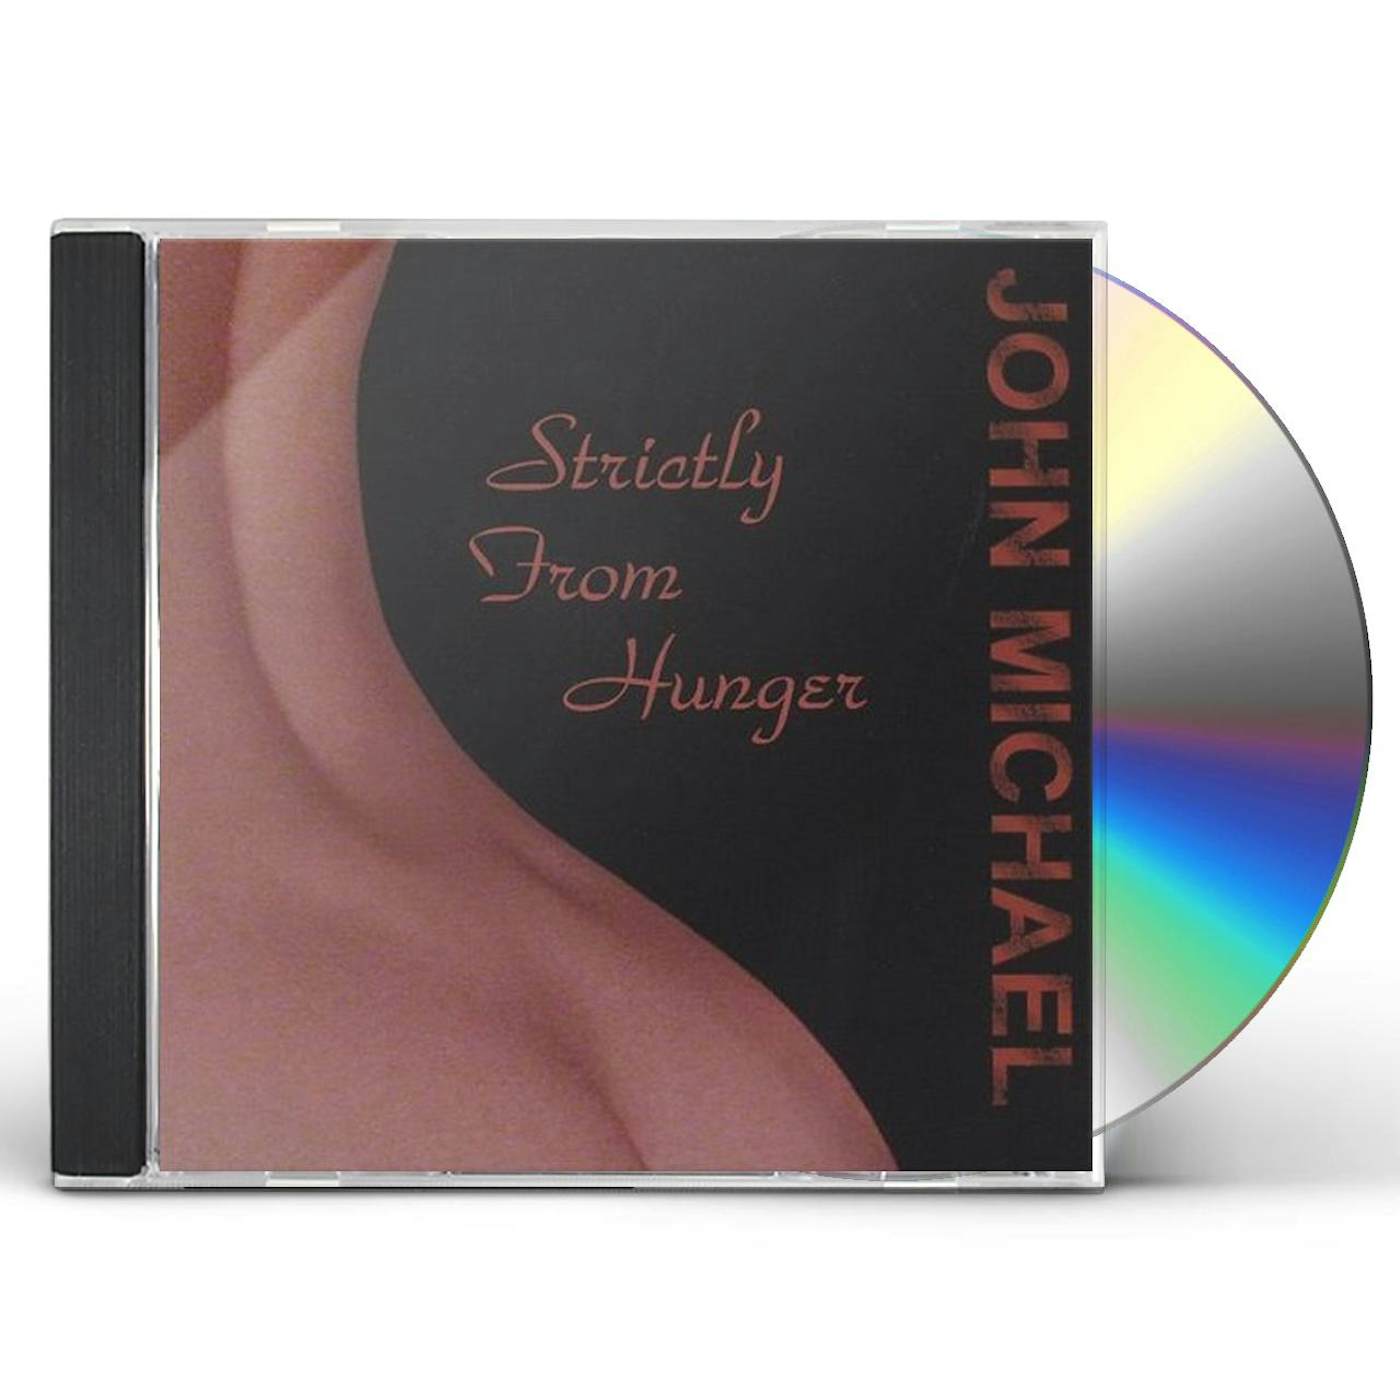 John Michael STRICTLY FROM HUNGER CD